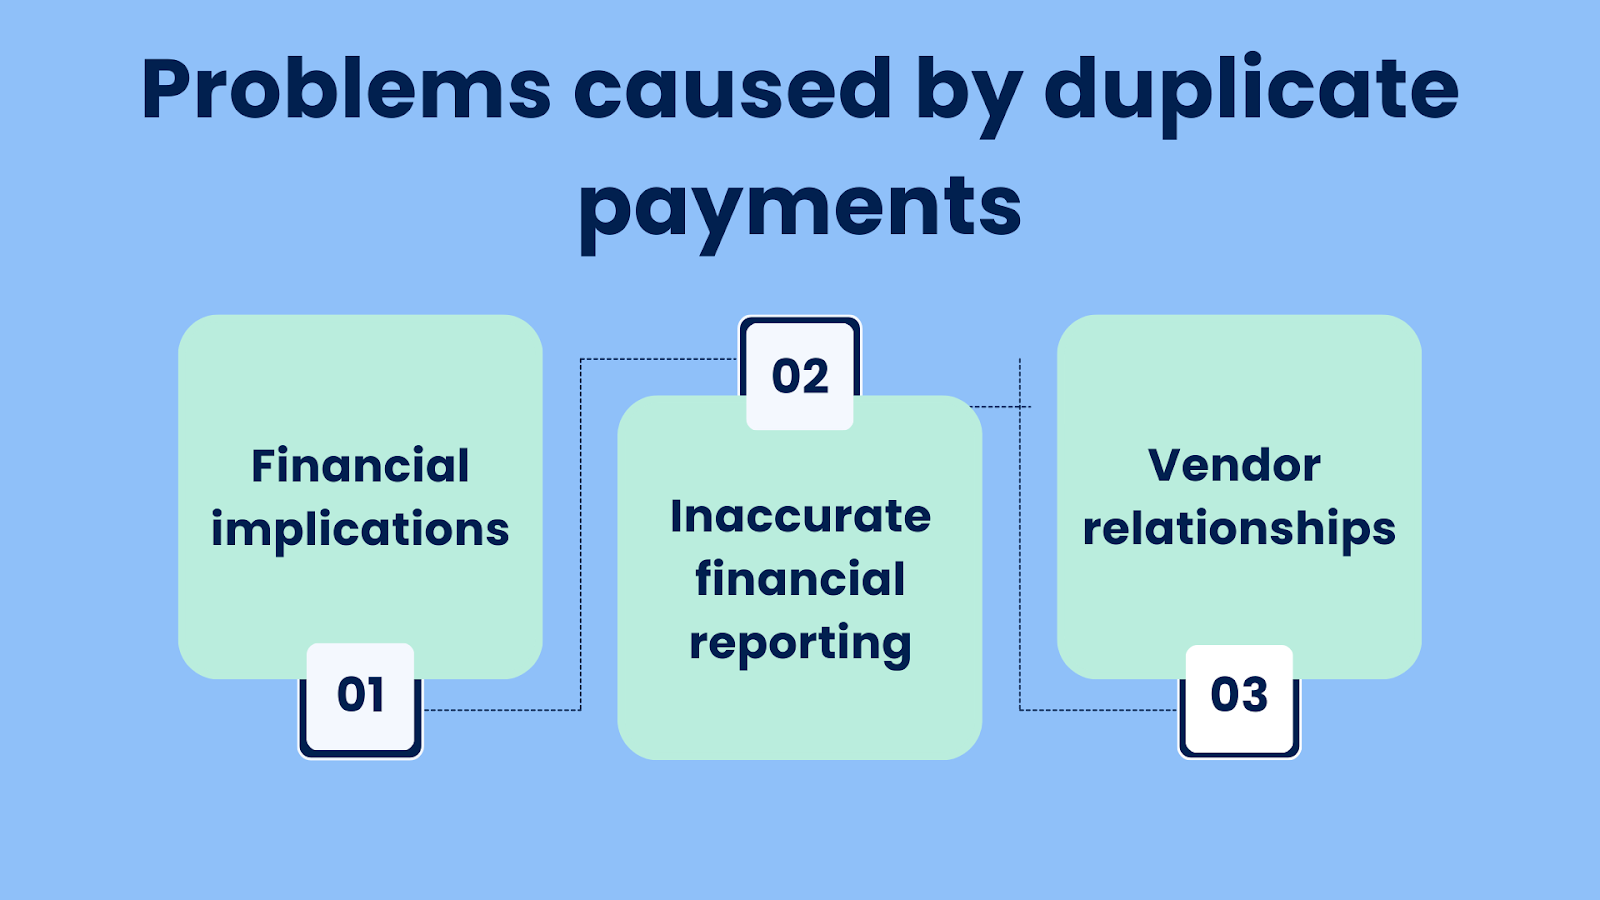 Problems caused by duplicate payments. Part 1